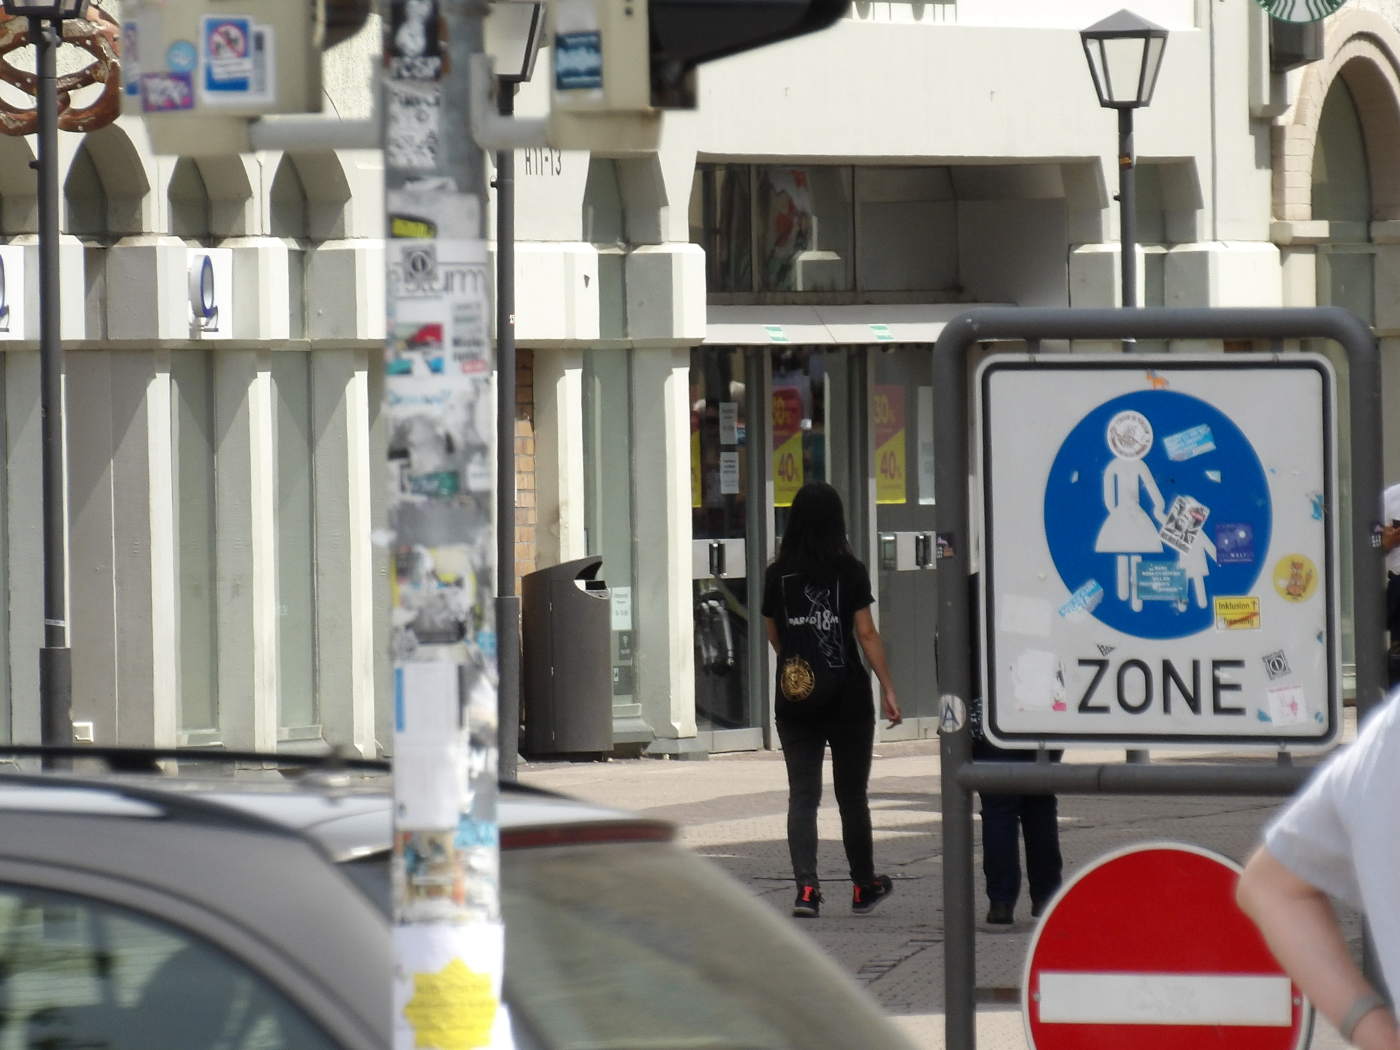 Warning people in the pedestrian zone – Always a success number